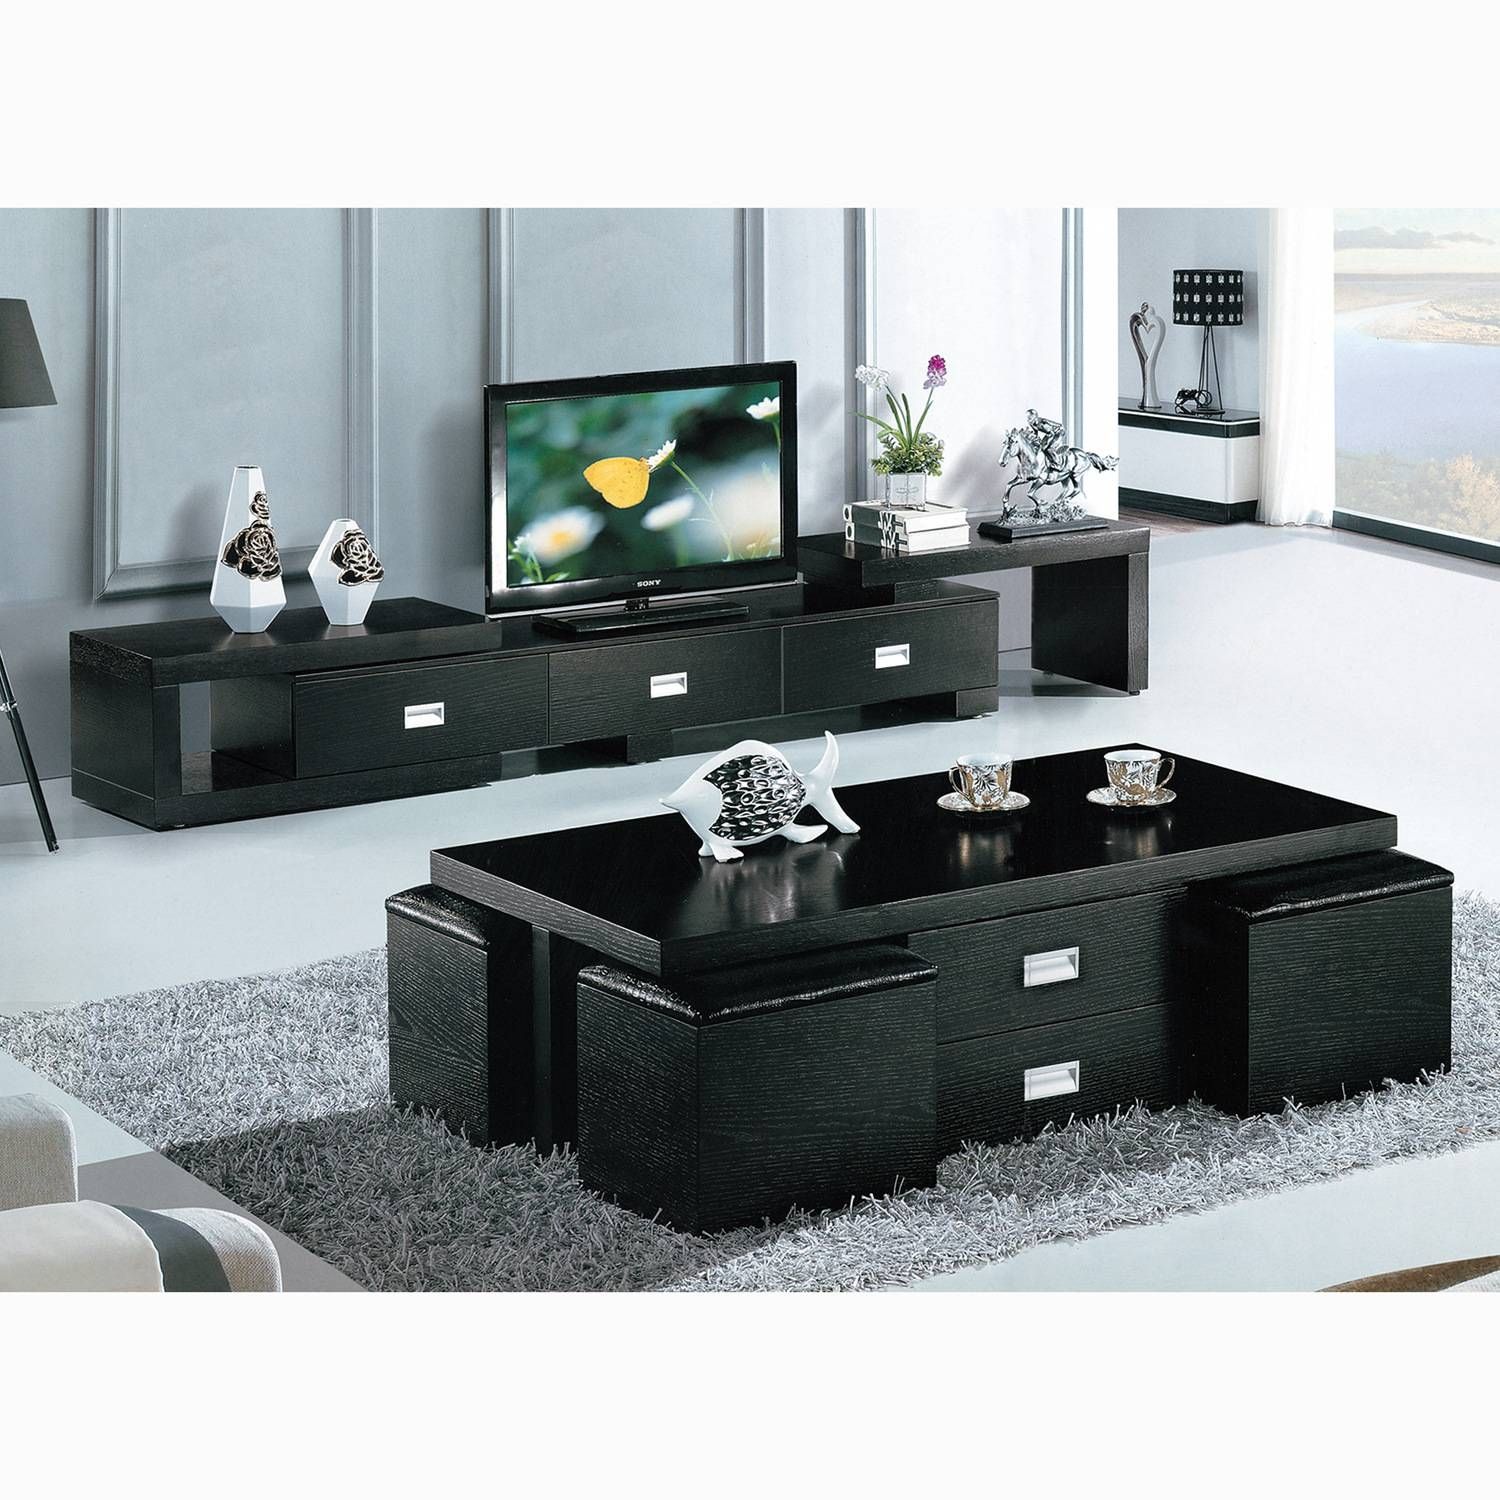 Grade Marble Coffee Table Tv Cabinet Telescopic Folding Chair Pertaining To Tv Cabinets And Coffee Table Sets (View 9 of 15)